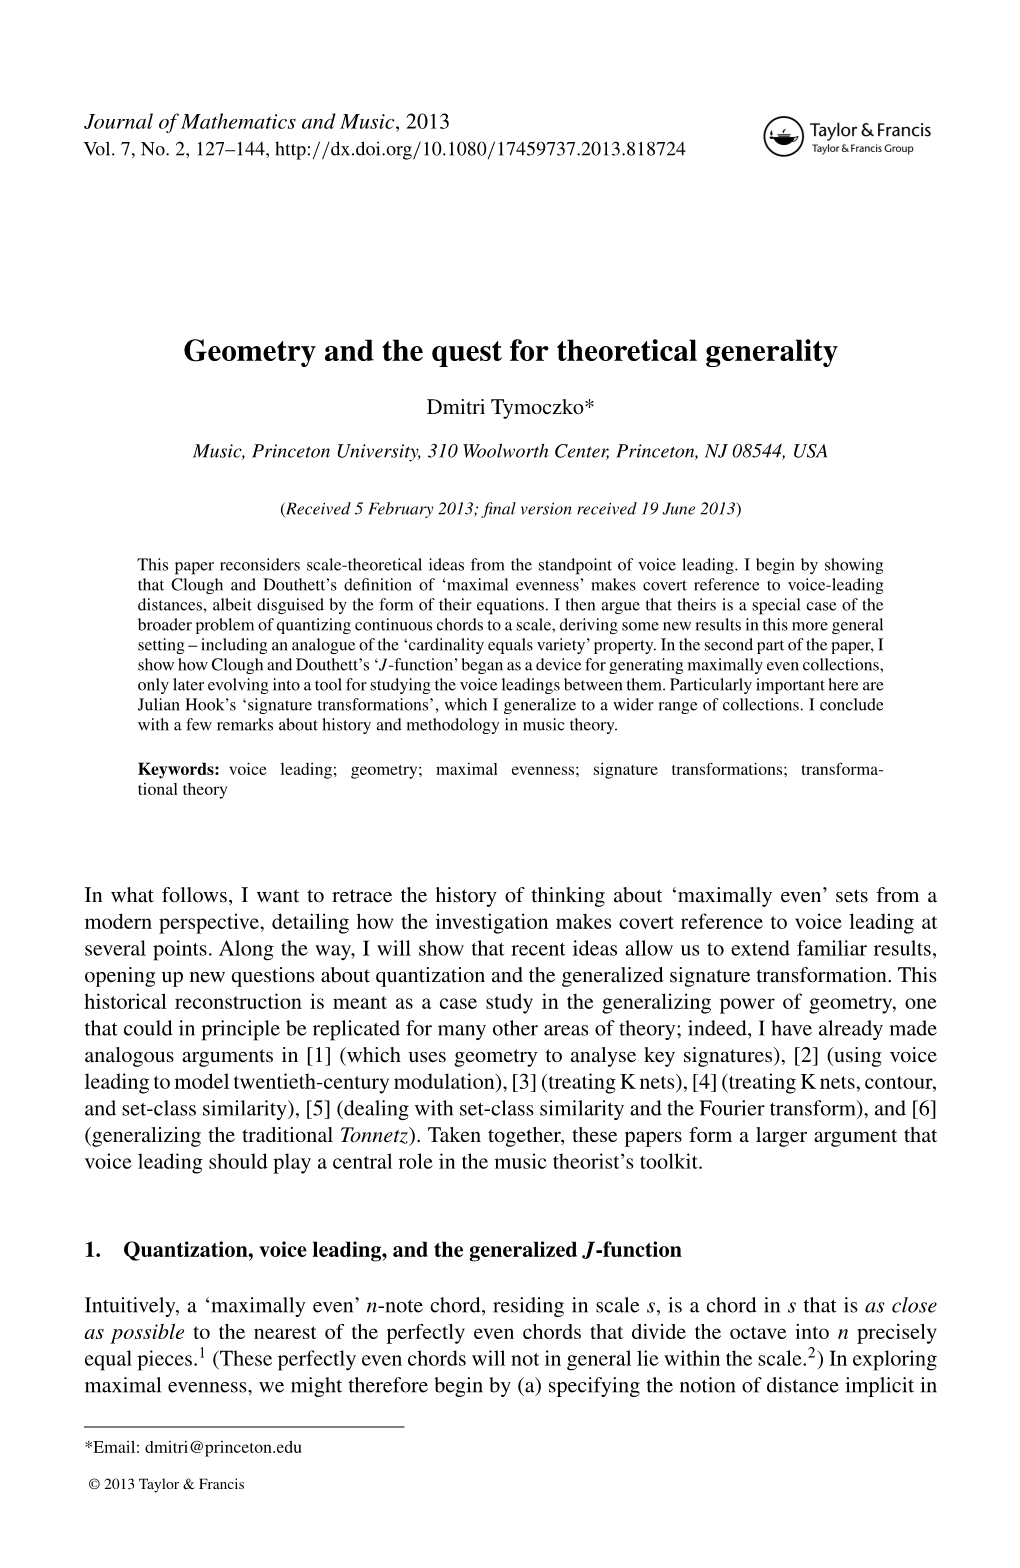 Geometry and the Quest for Theoretical Generality